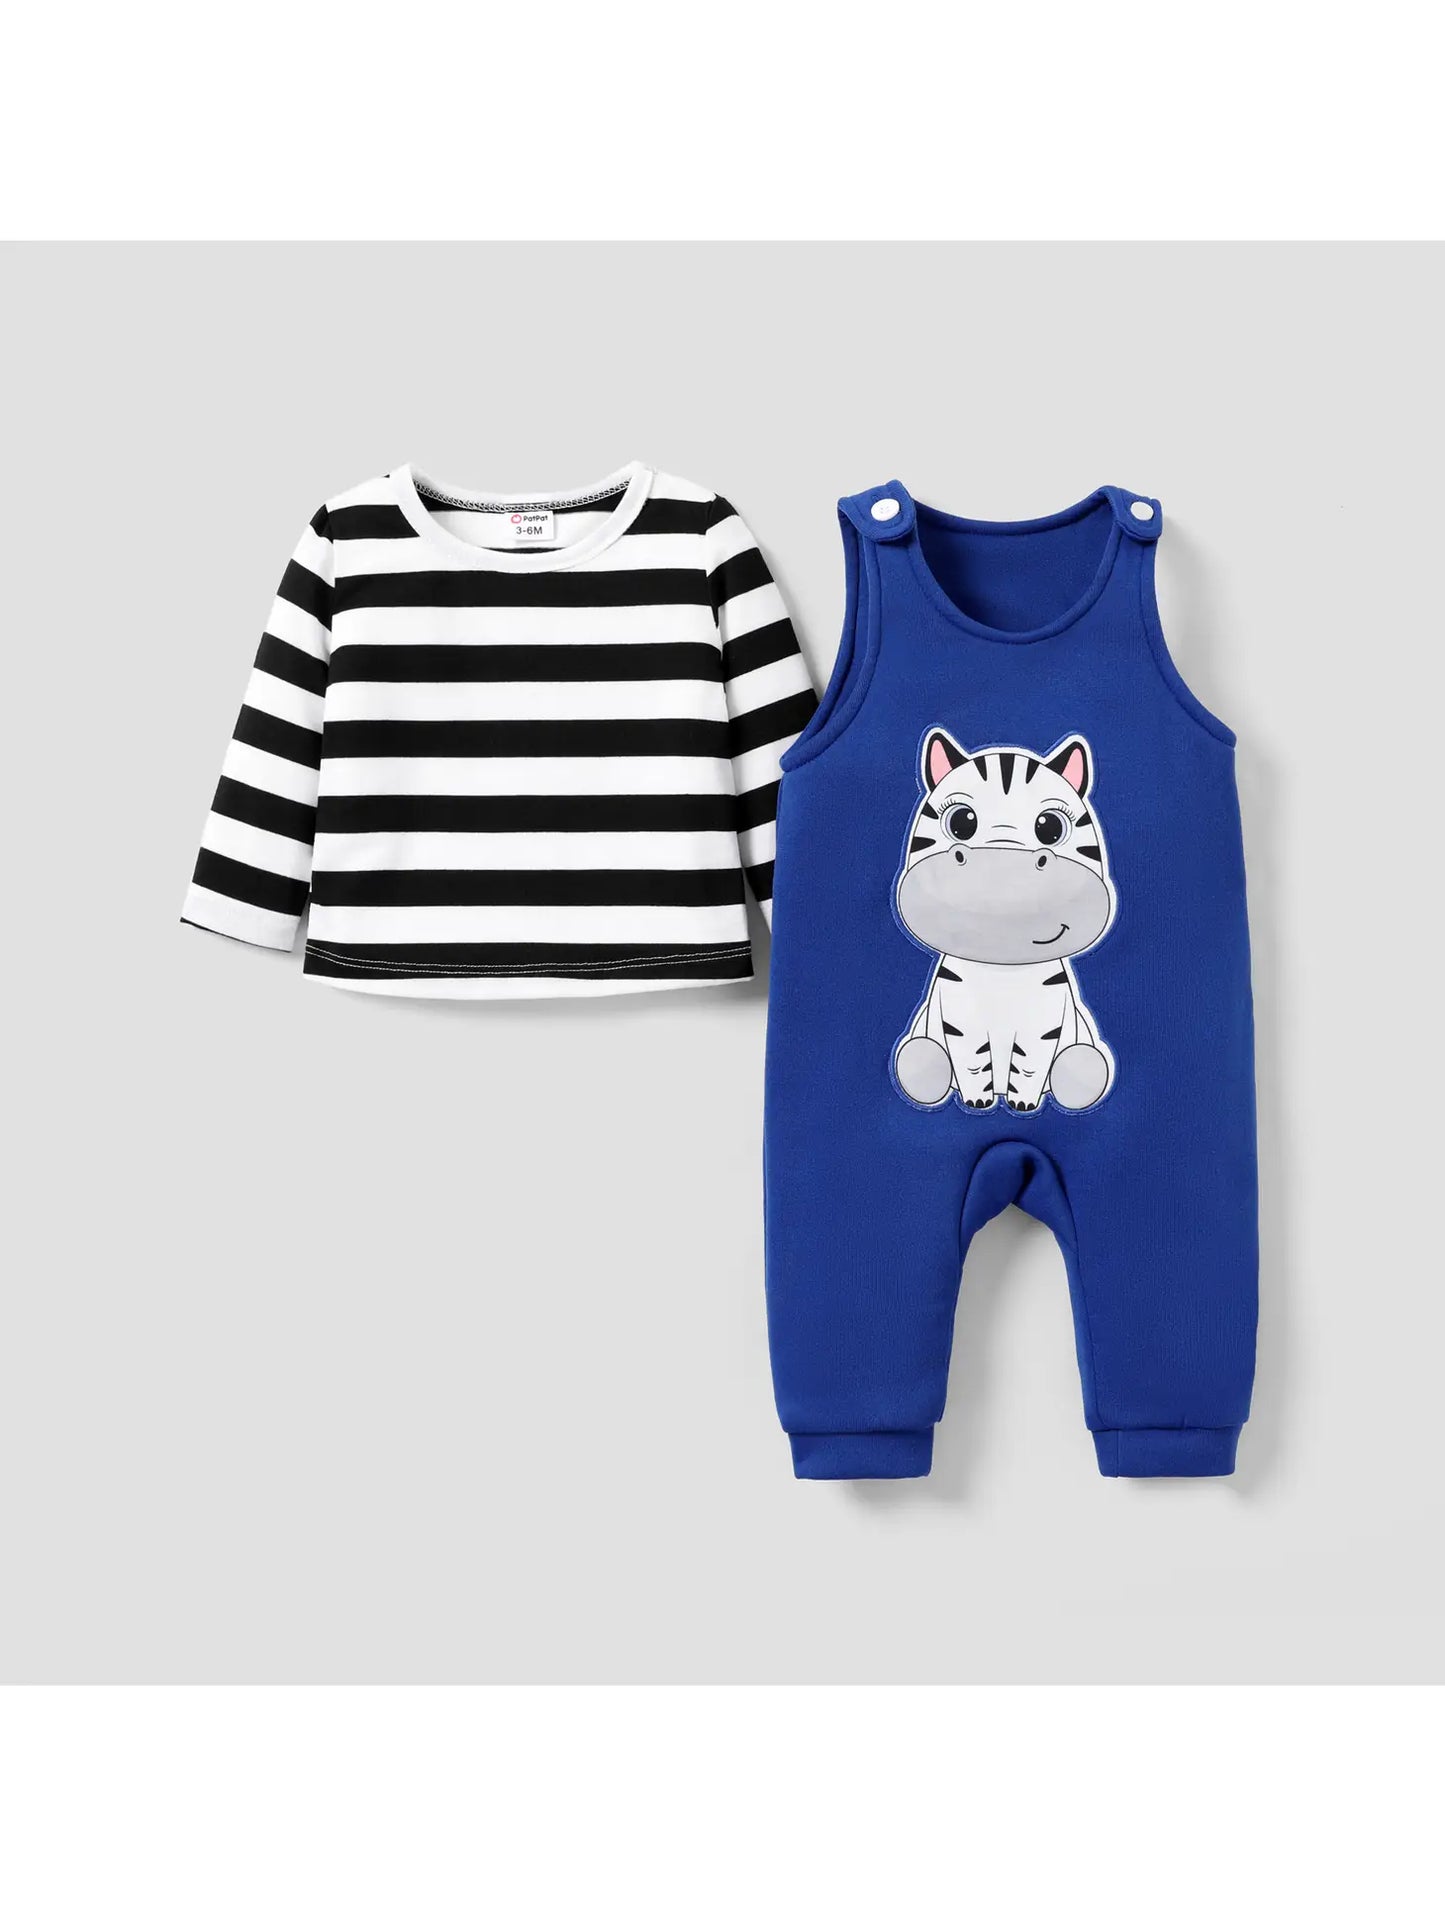 Zebra Outfit w/ Blue Dungarees